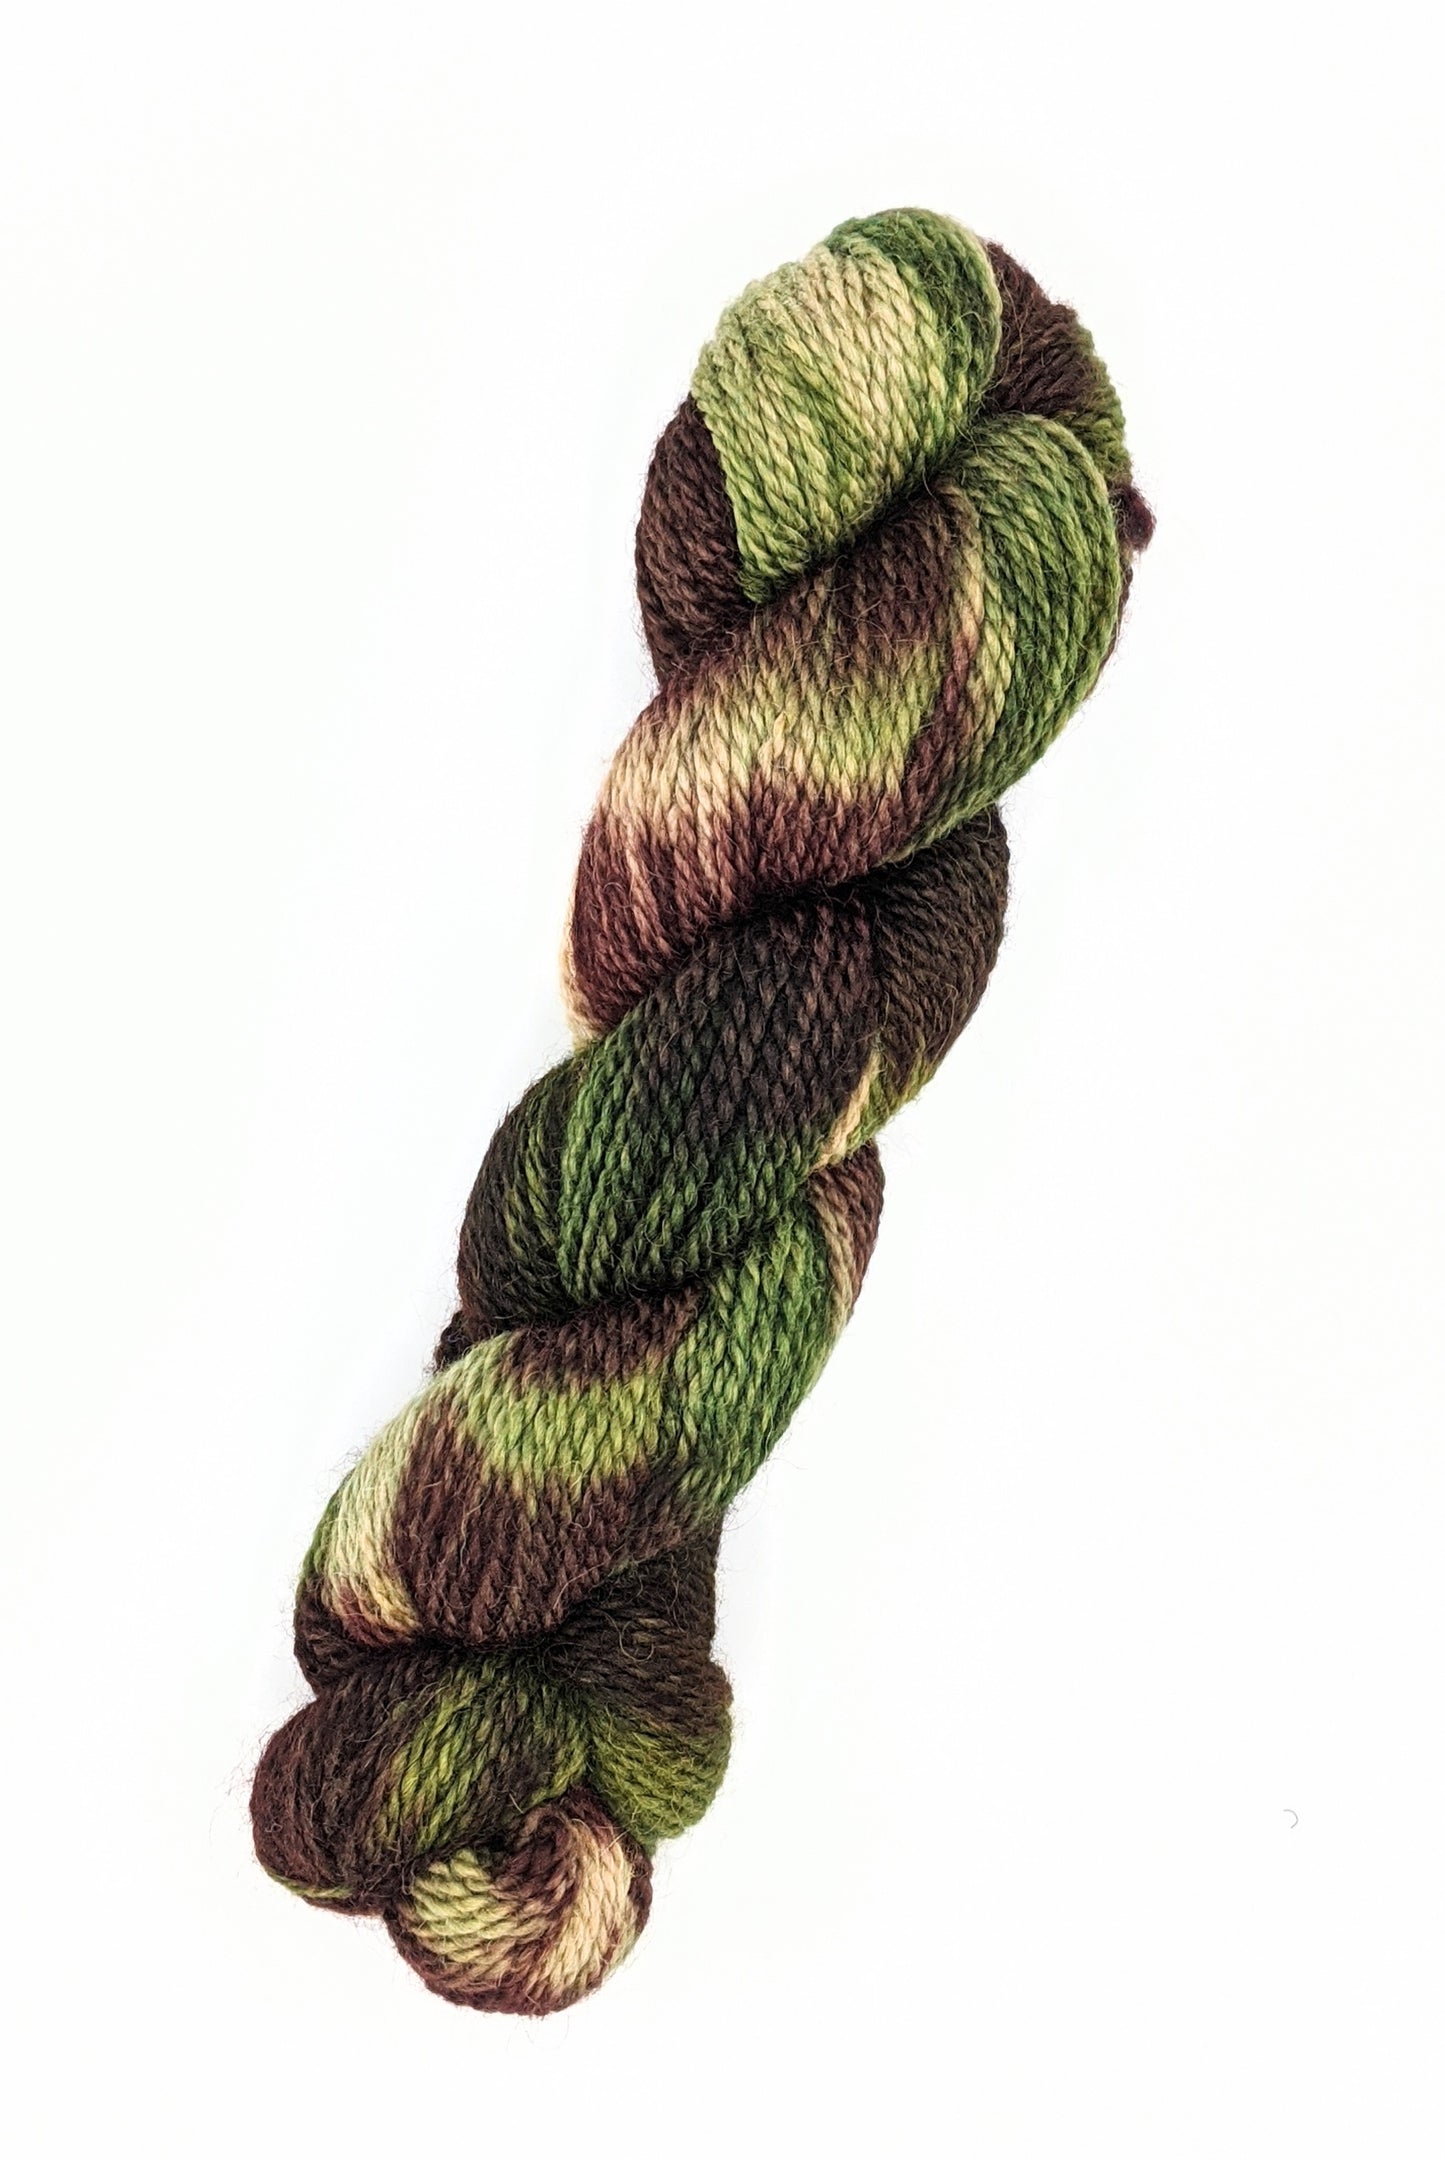 DK Knitter's Yarn Brown and Green